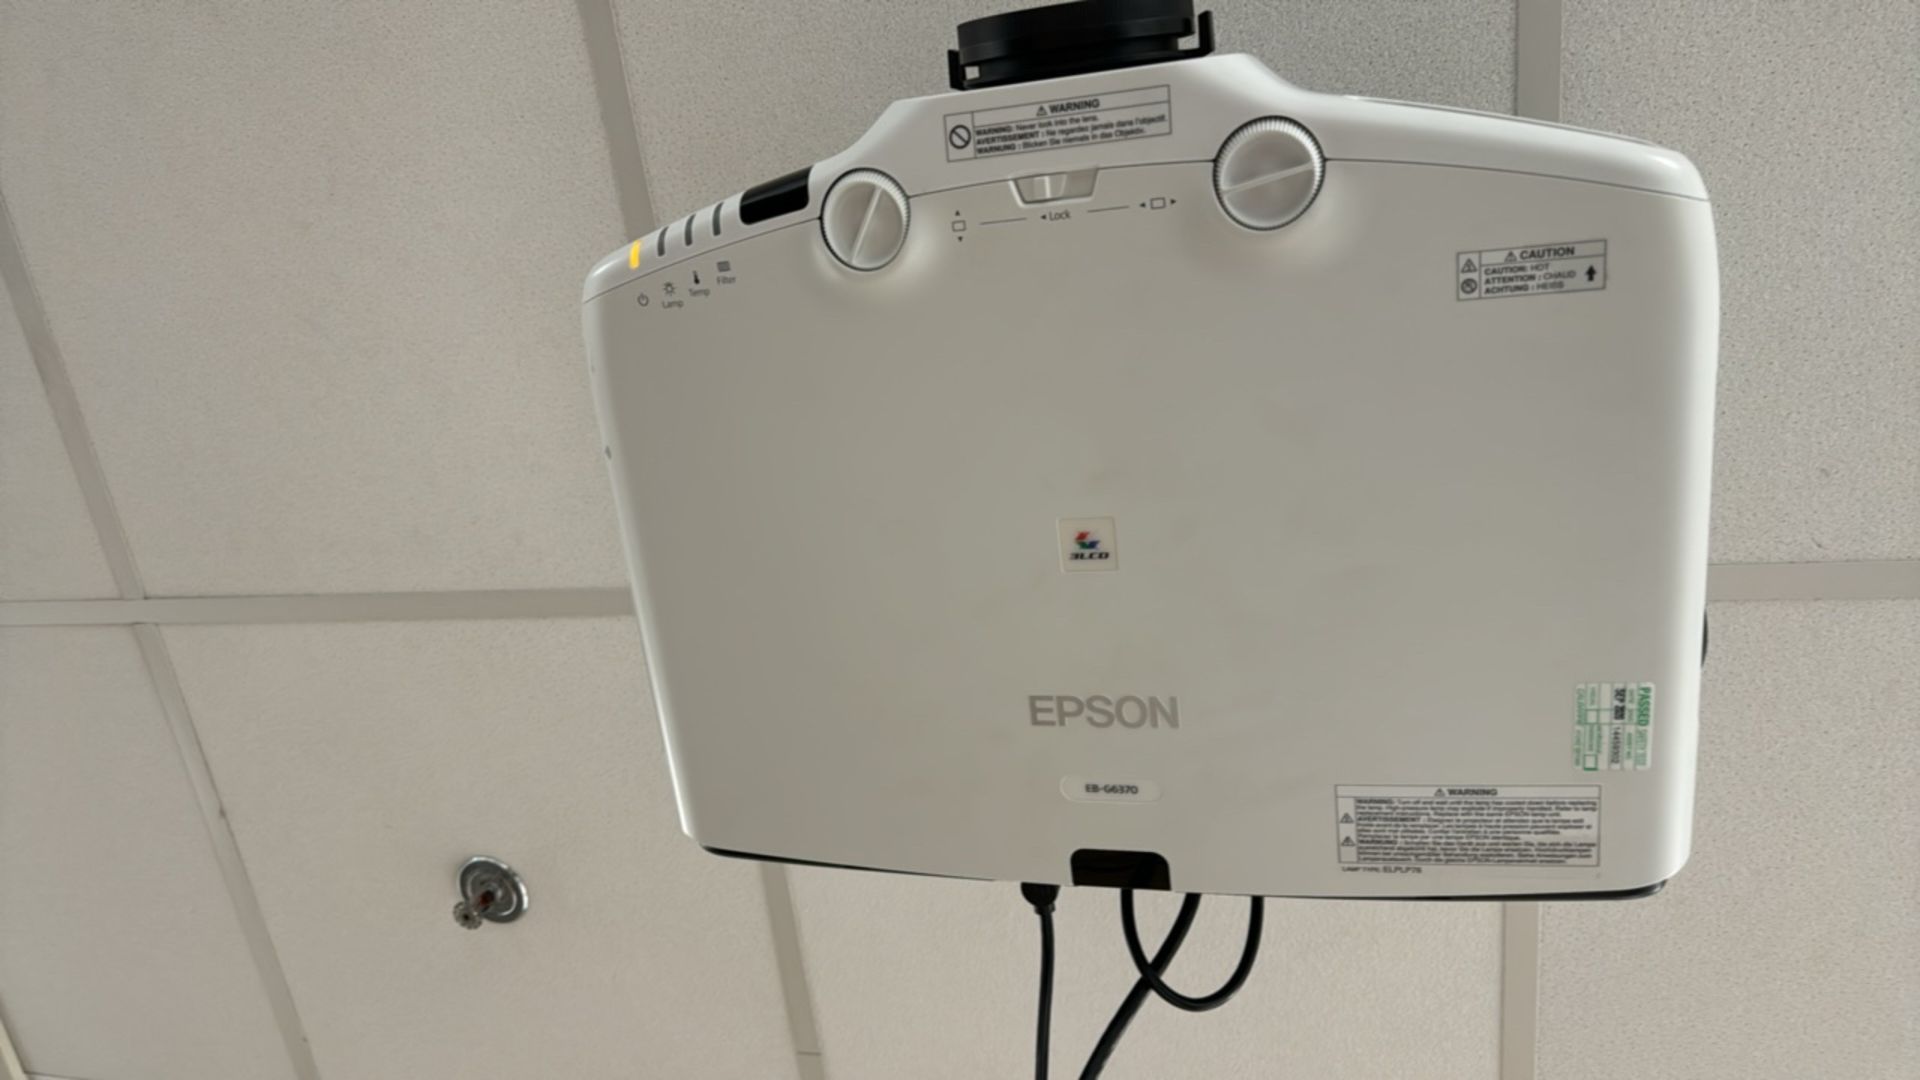 ref 284 - Epson Projector - Image 3 of 4